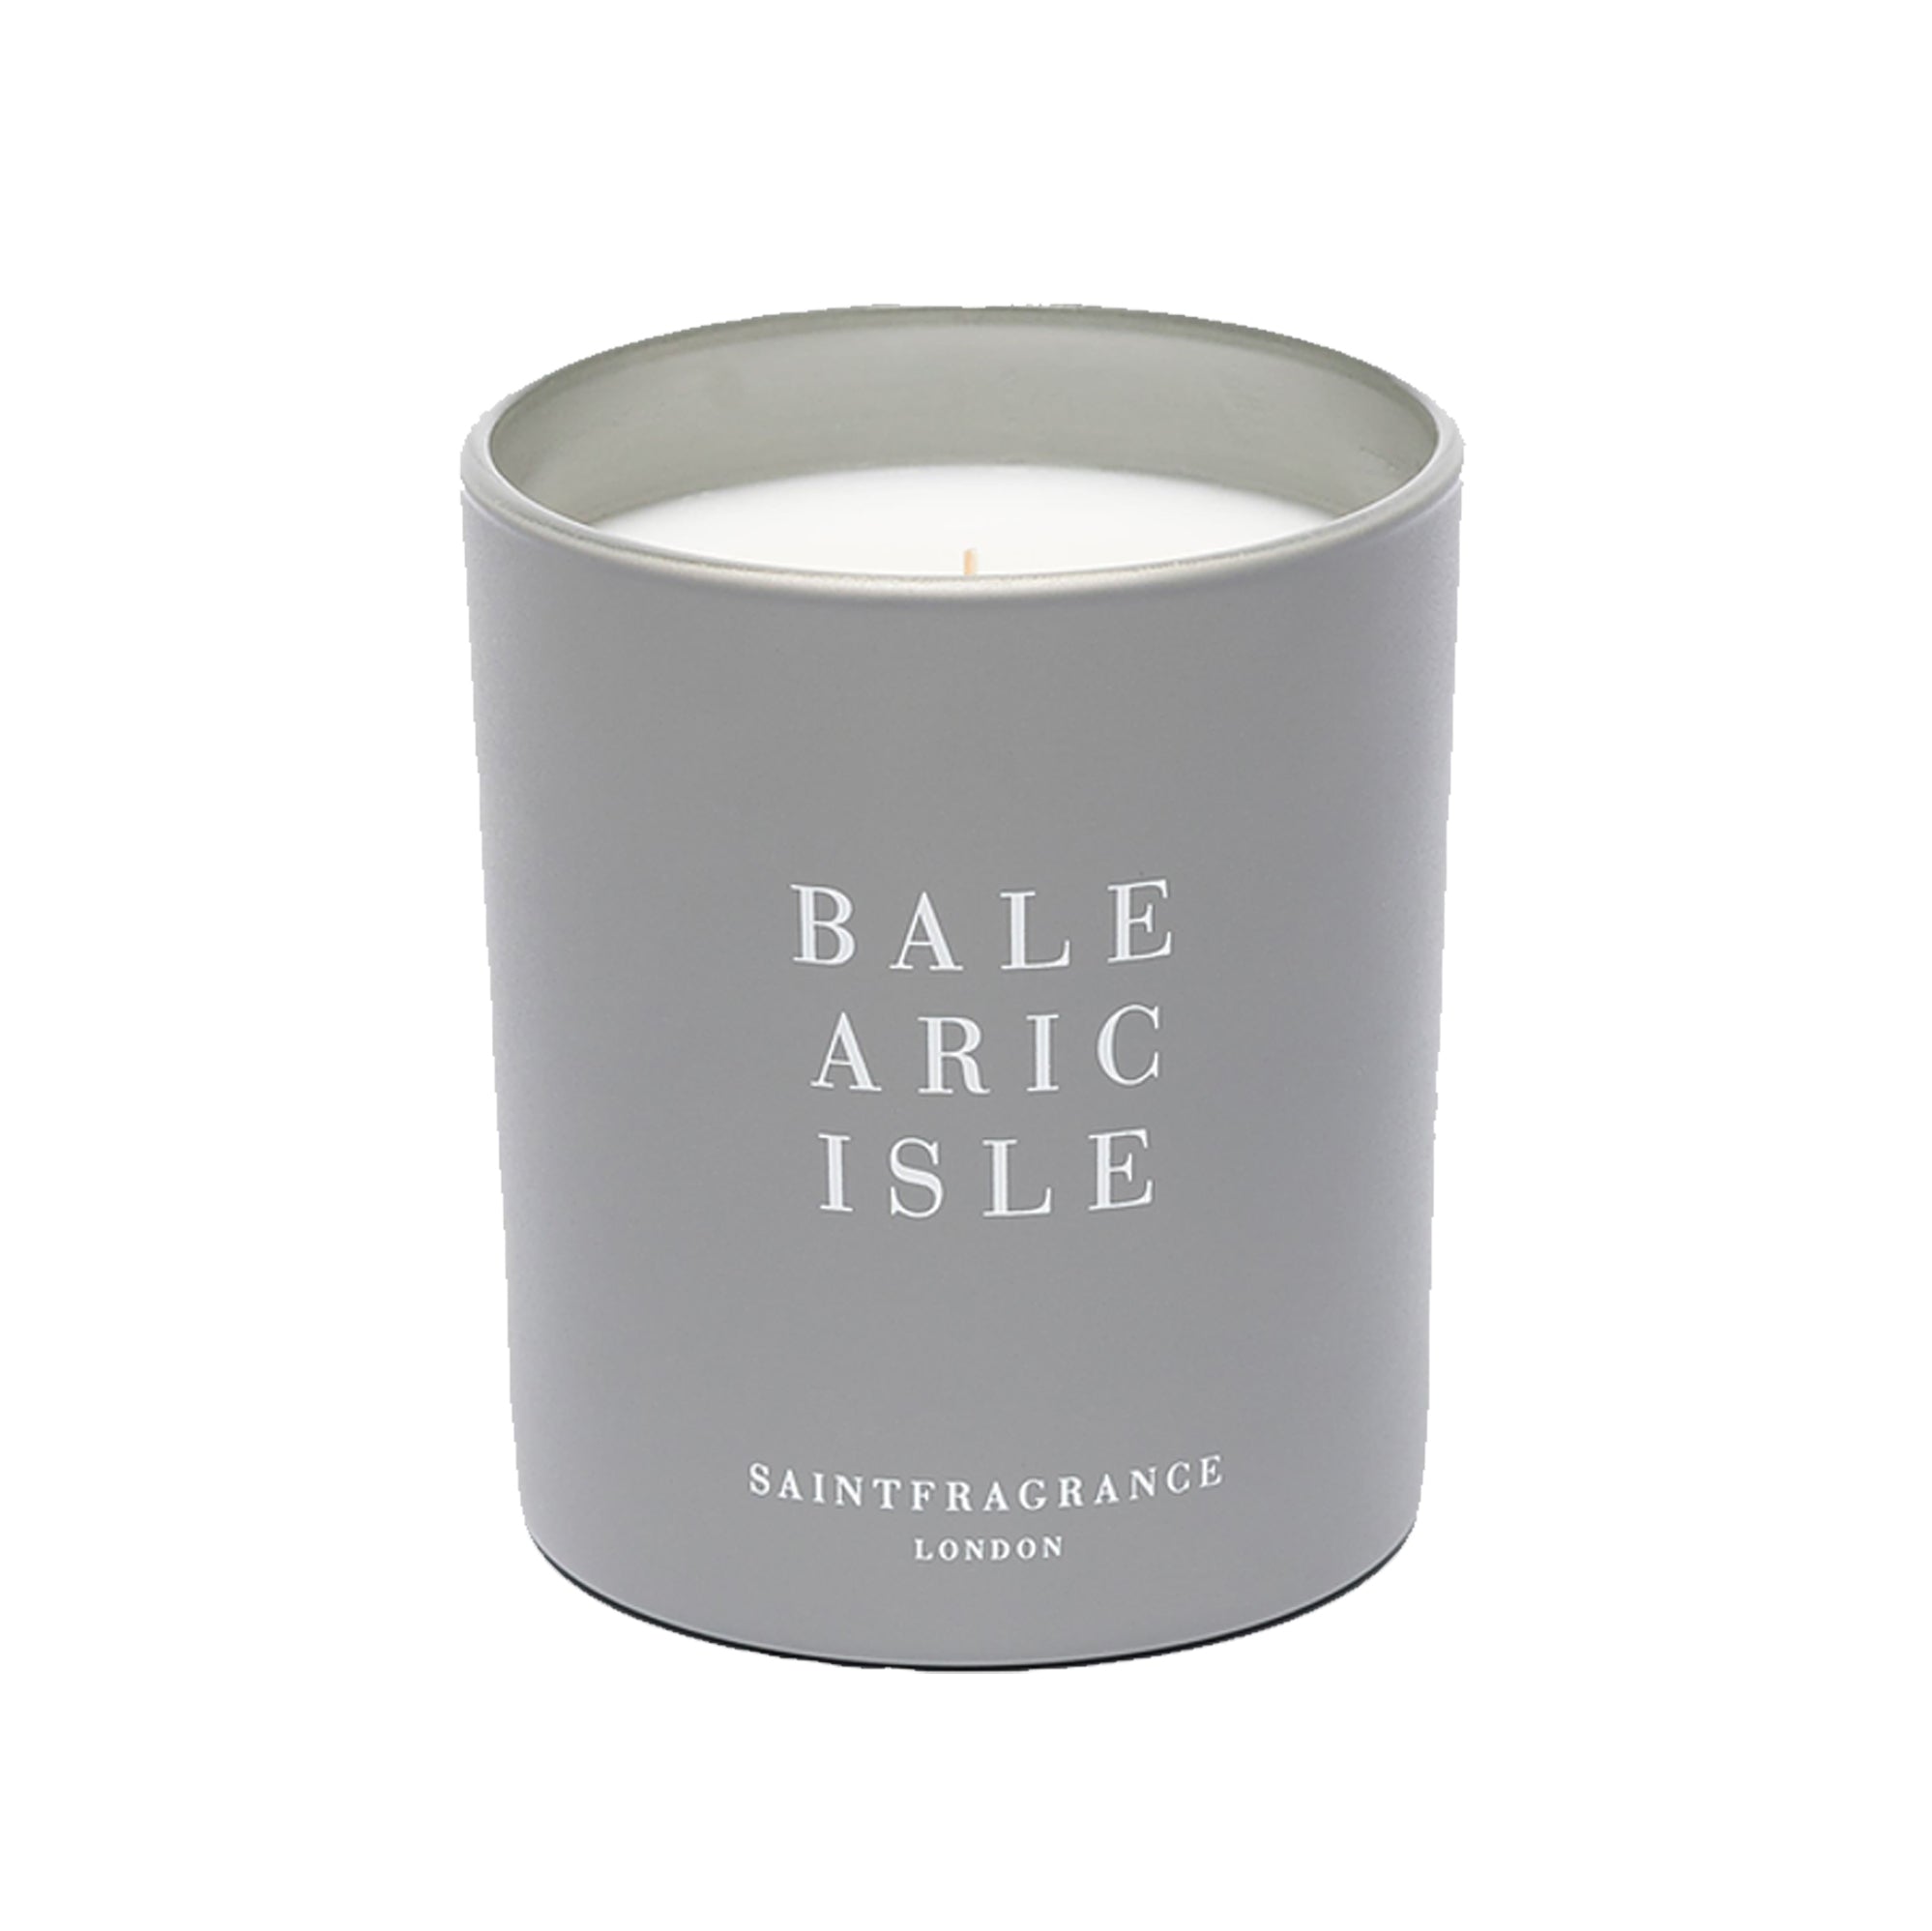 Balearic Isle 200g Scented Candle by Saint Fragrance